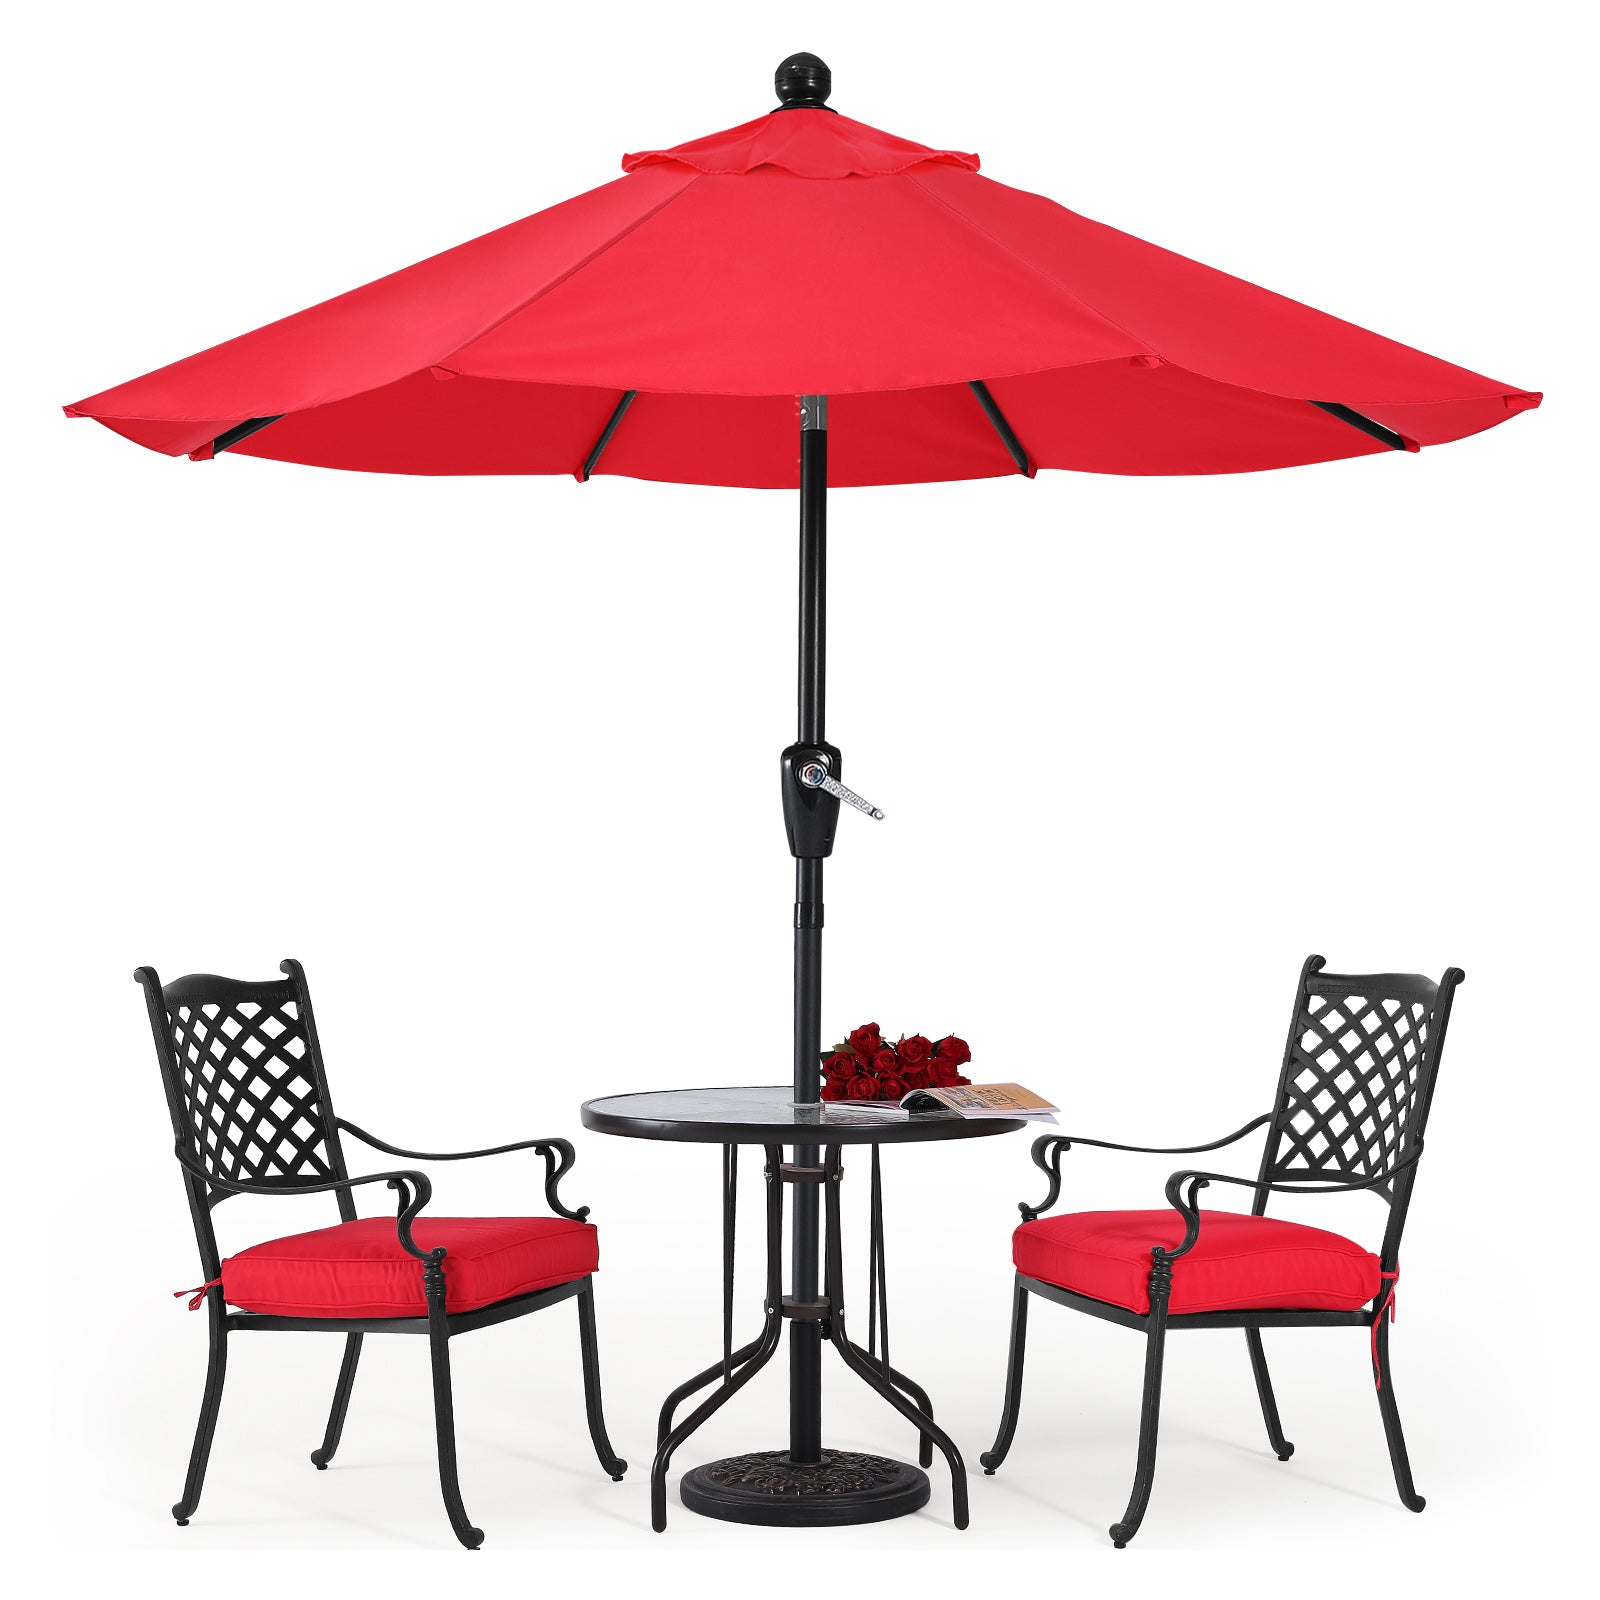 Outdoor Waterproof Table 8 Ribs Umbrella with Push Button Tilt and Crank